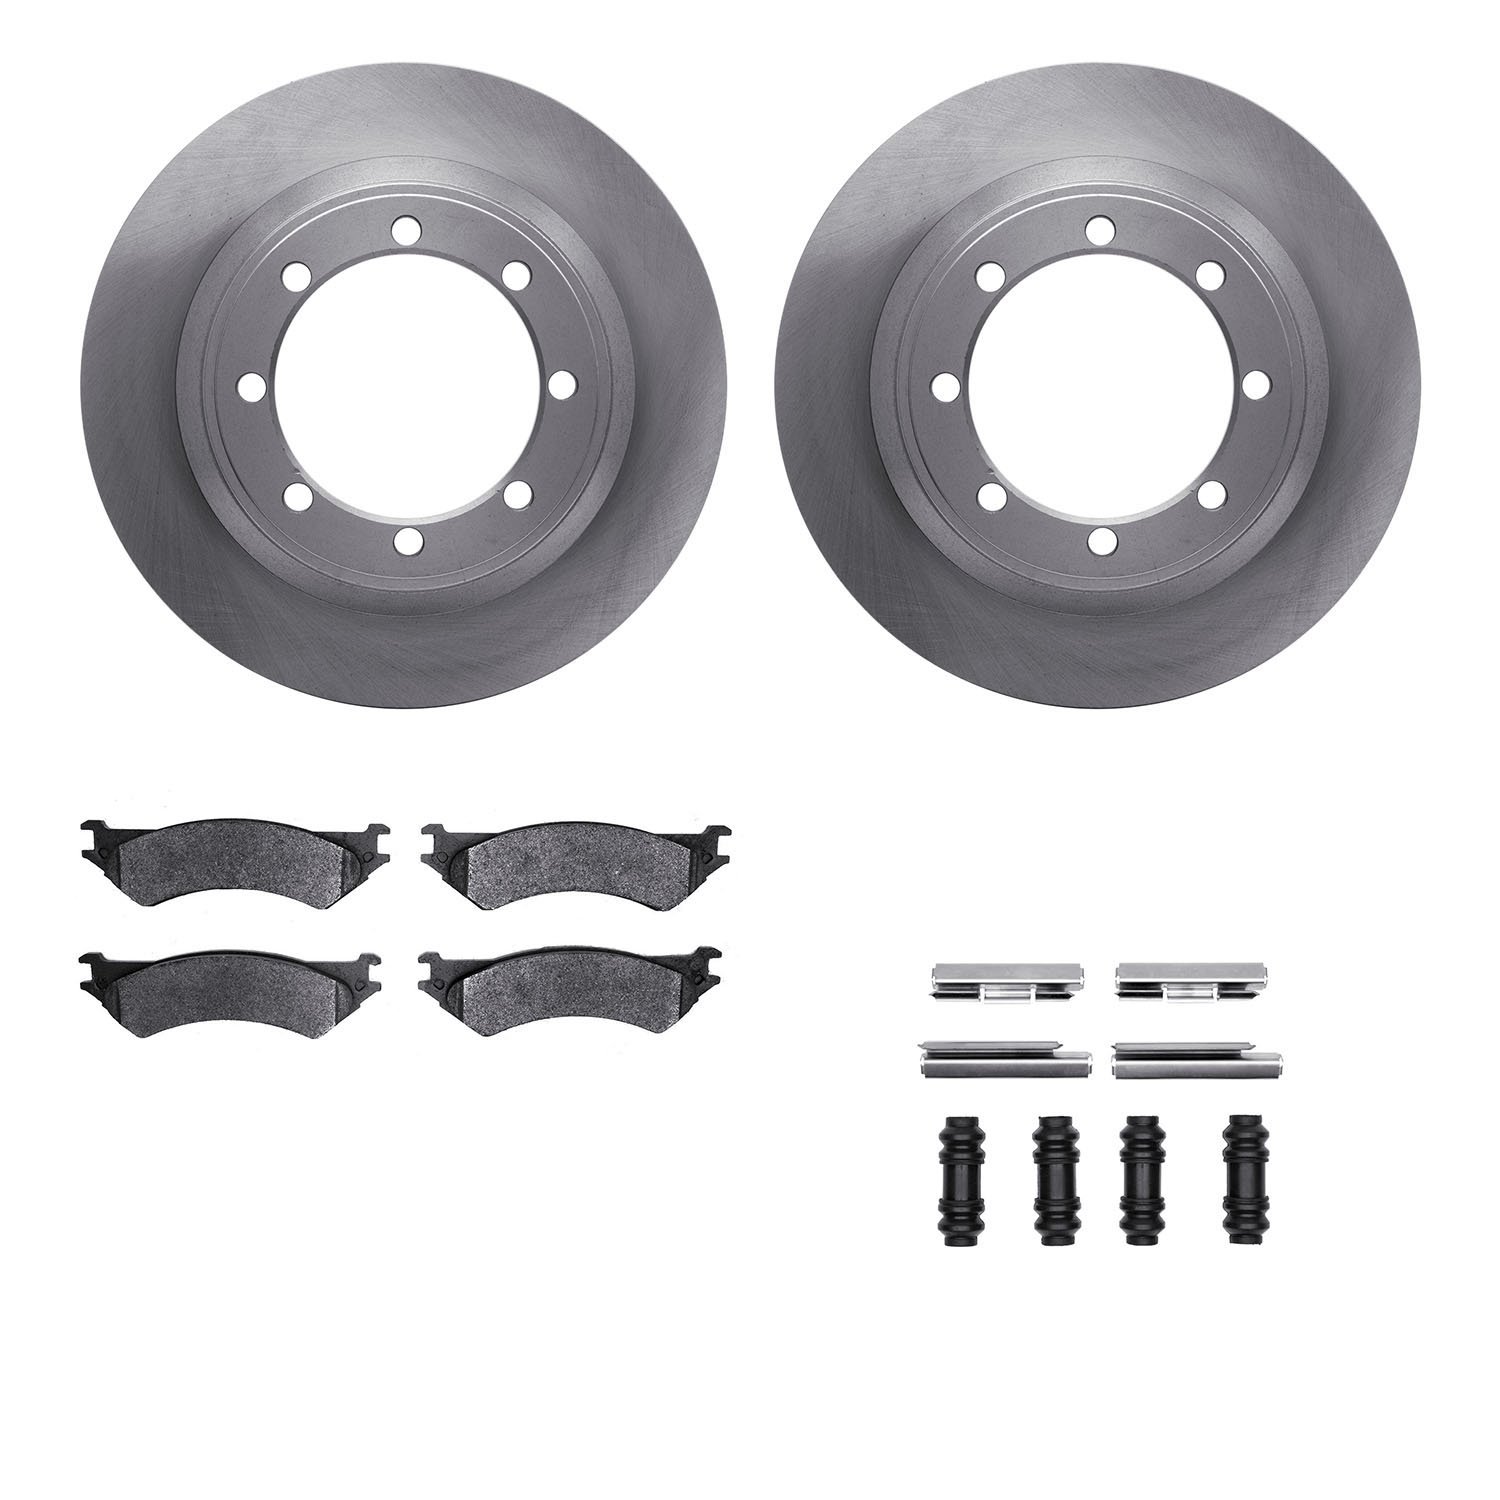 6412-54161 Brake Rotors with Ultimate-Duty Brake Pads Kit & Hardware, 1999-2007 Ford/Lincoln/Mercury/Mazda, Position: Rear